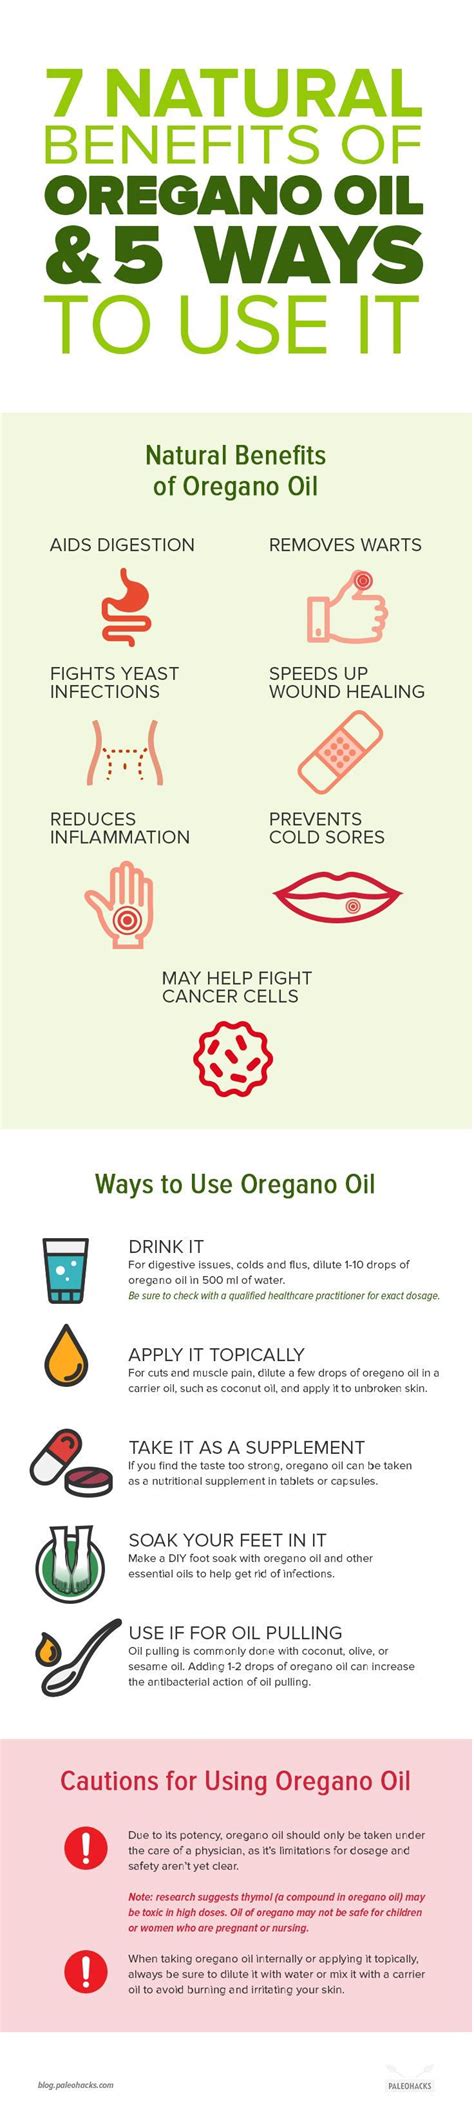 Oregano Oil Is One Of Natures Most Powerful Herbs That Can Help